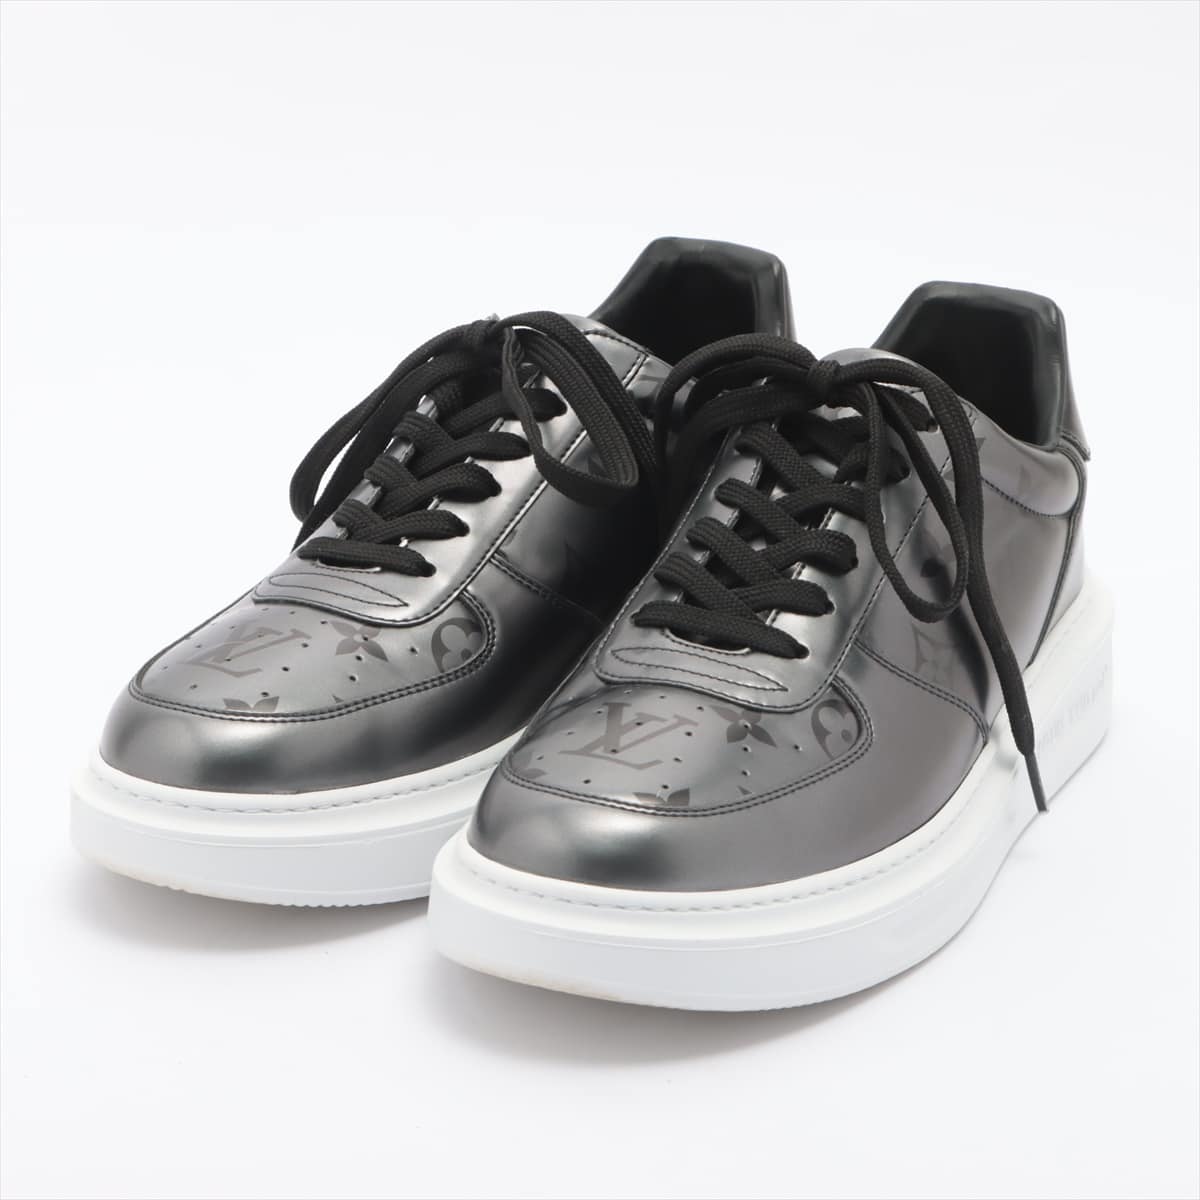 Louis Vuitton Beverly Hills Line 21 years Leather Sneakers 5 Men's Grey FA0251 Monogram